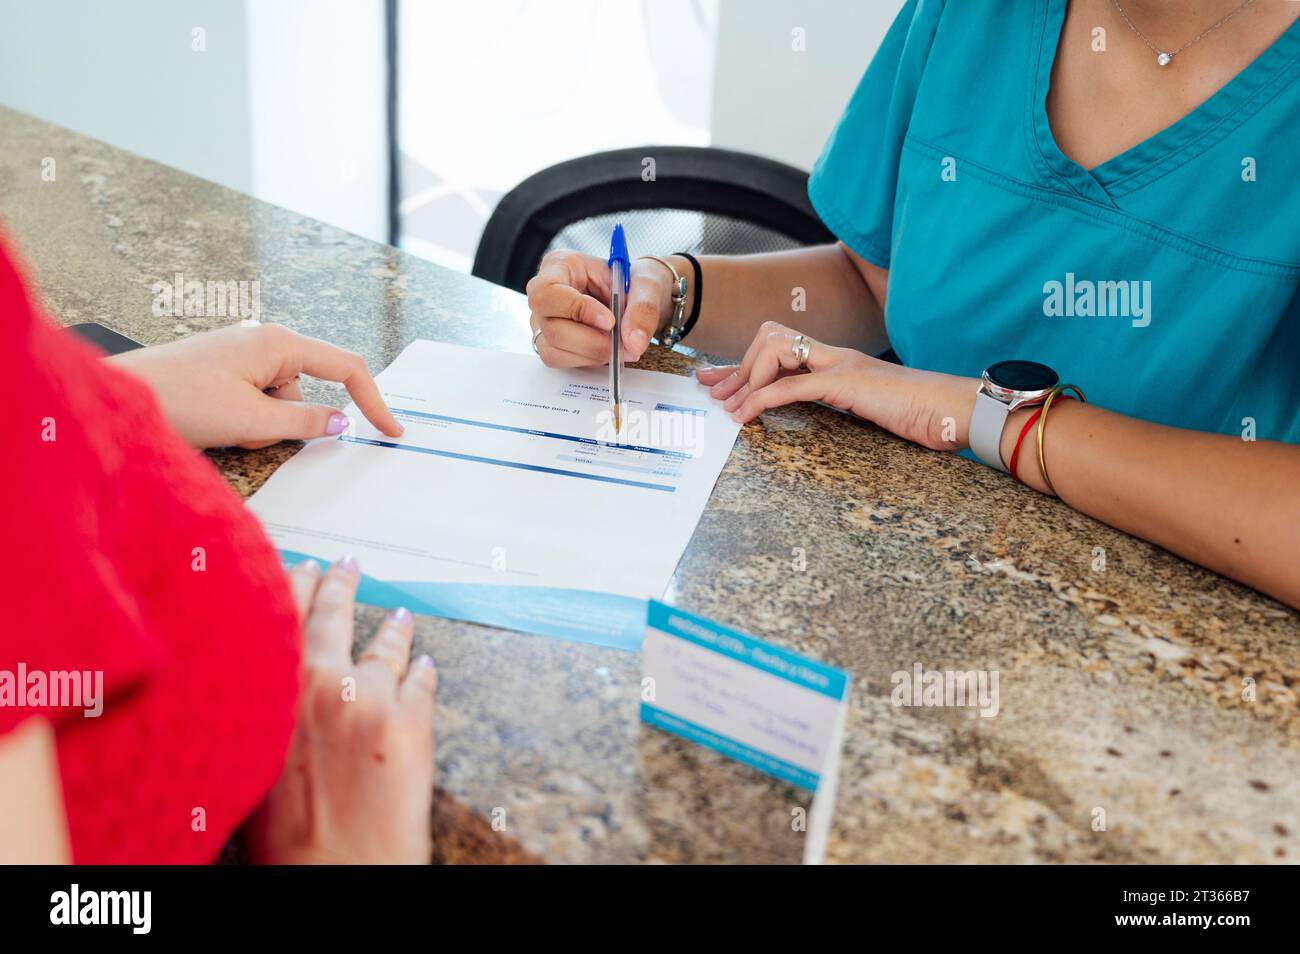 Receptionist giving prescription to patient at checkout in clinic Stock Photo